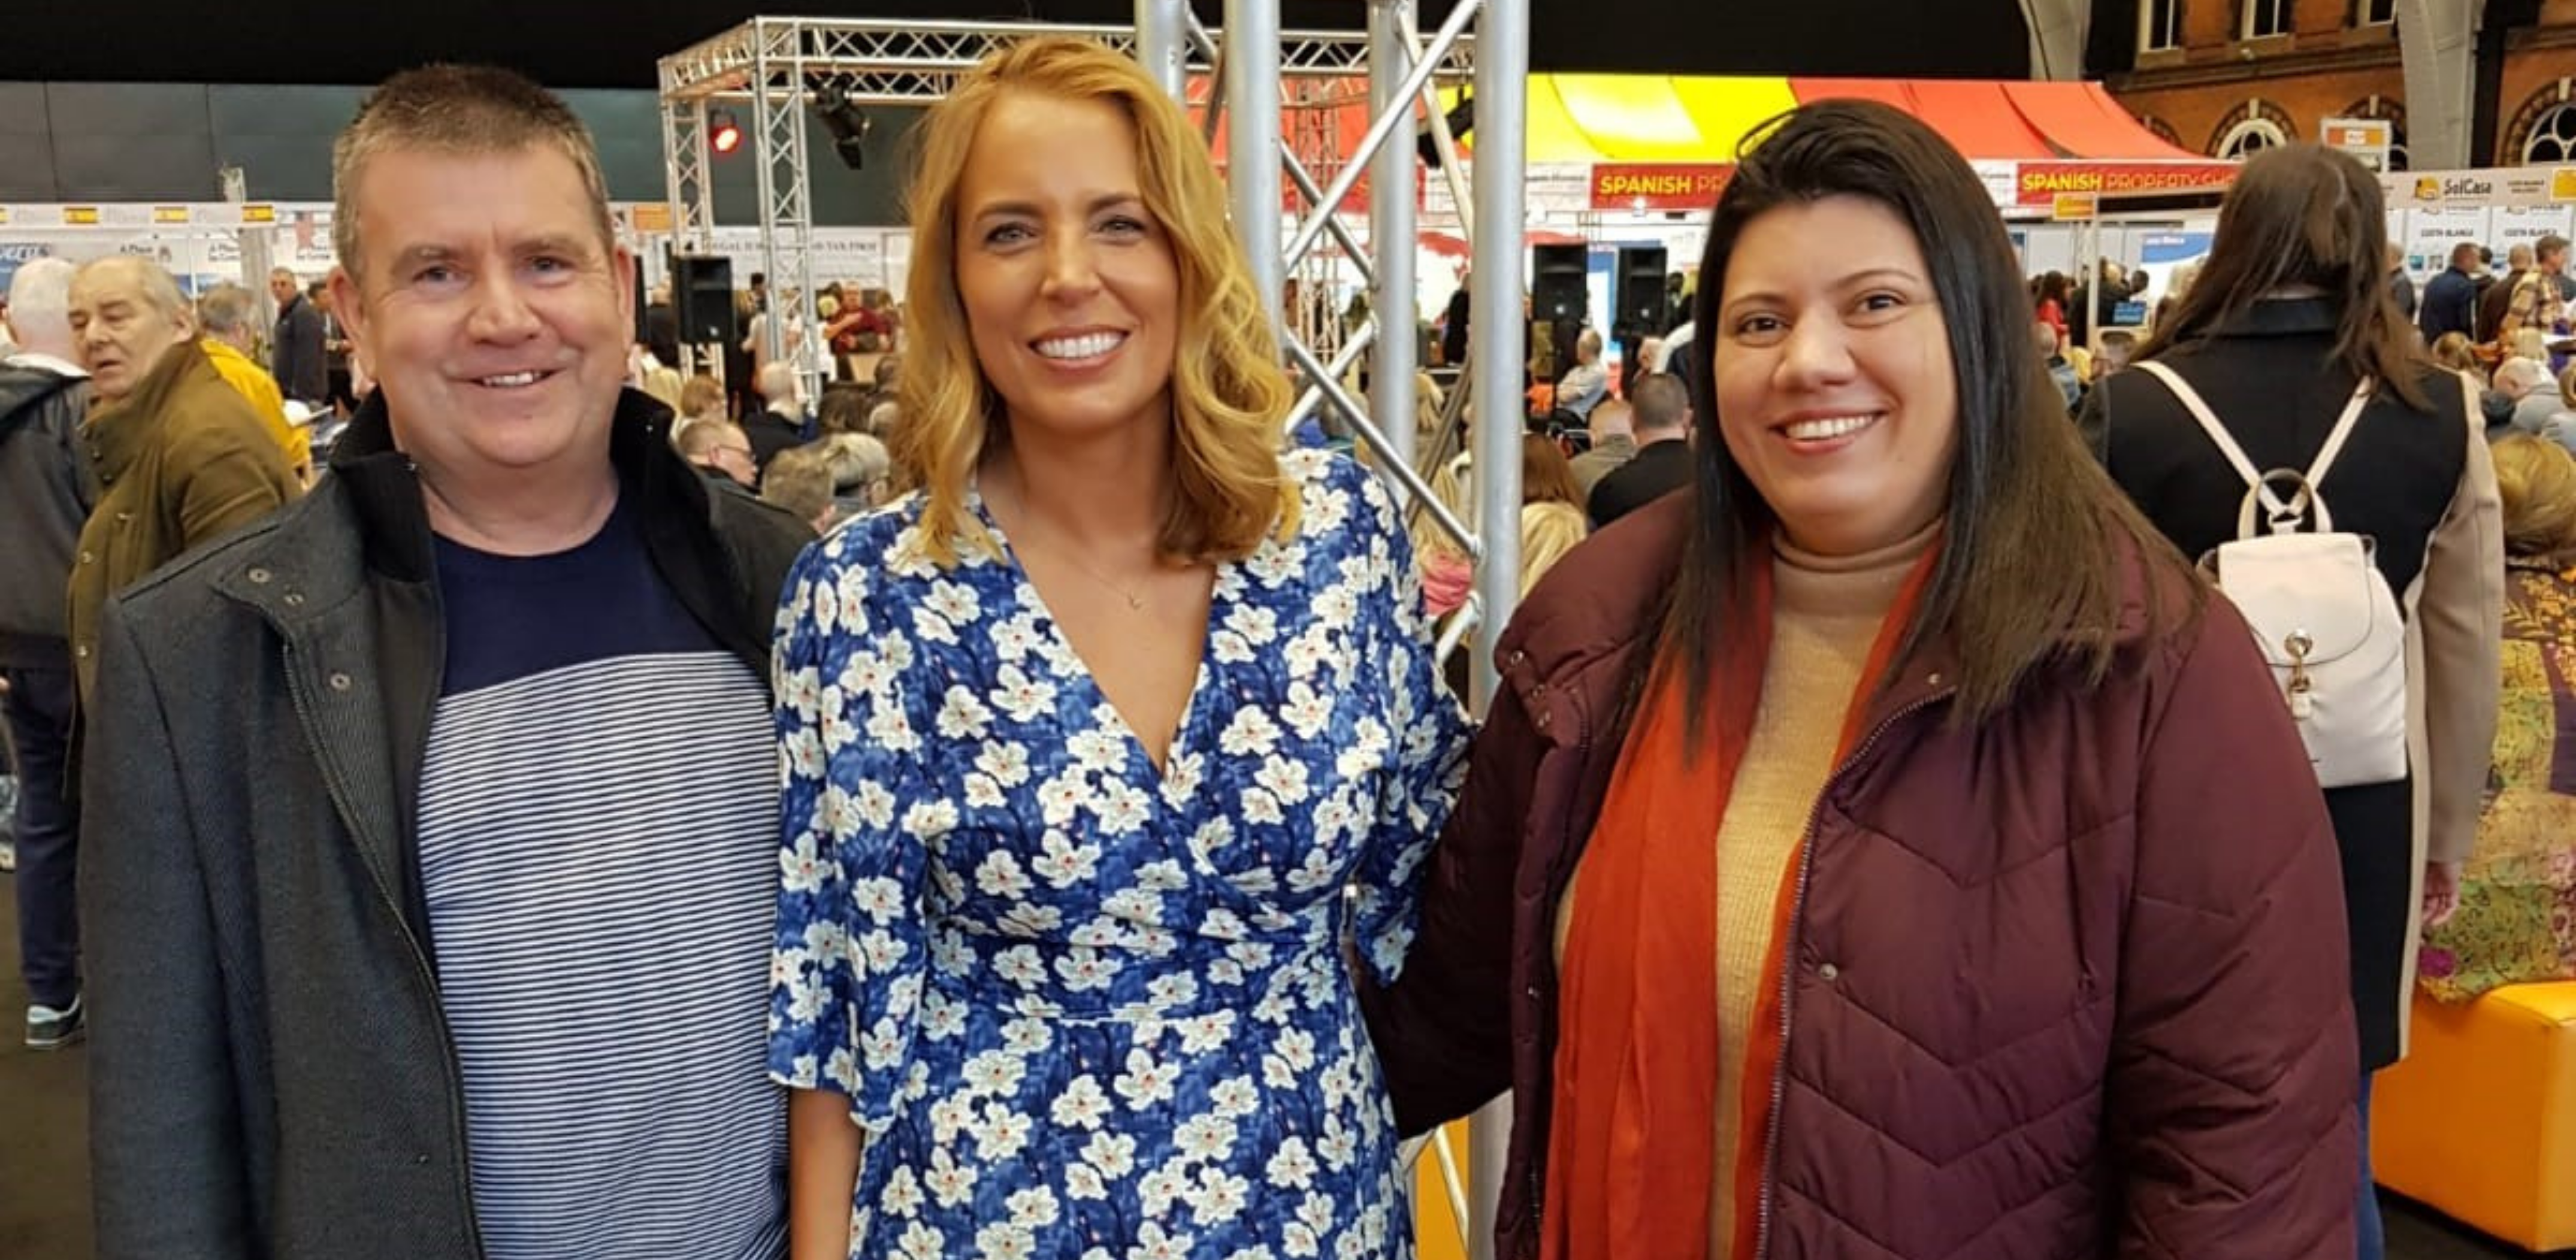 Jasmine Harman with Craig and Daisy Stott at A Place in the Sun Live Manchester